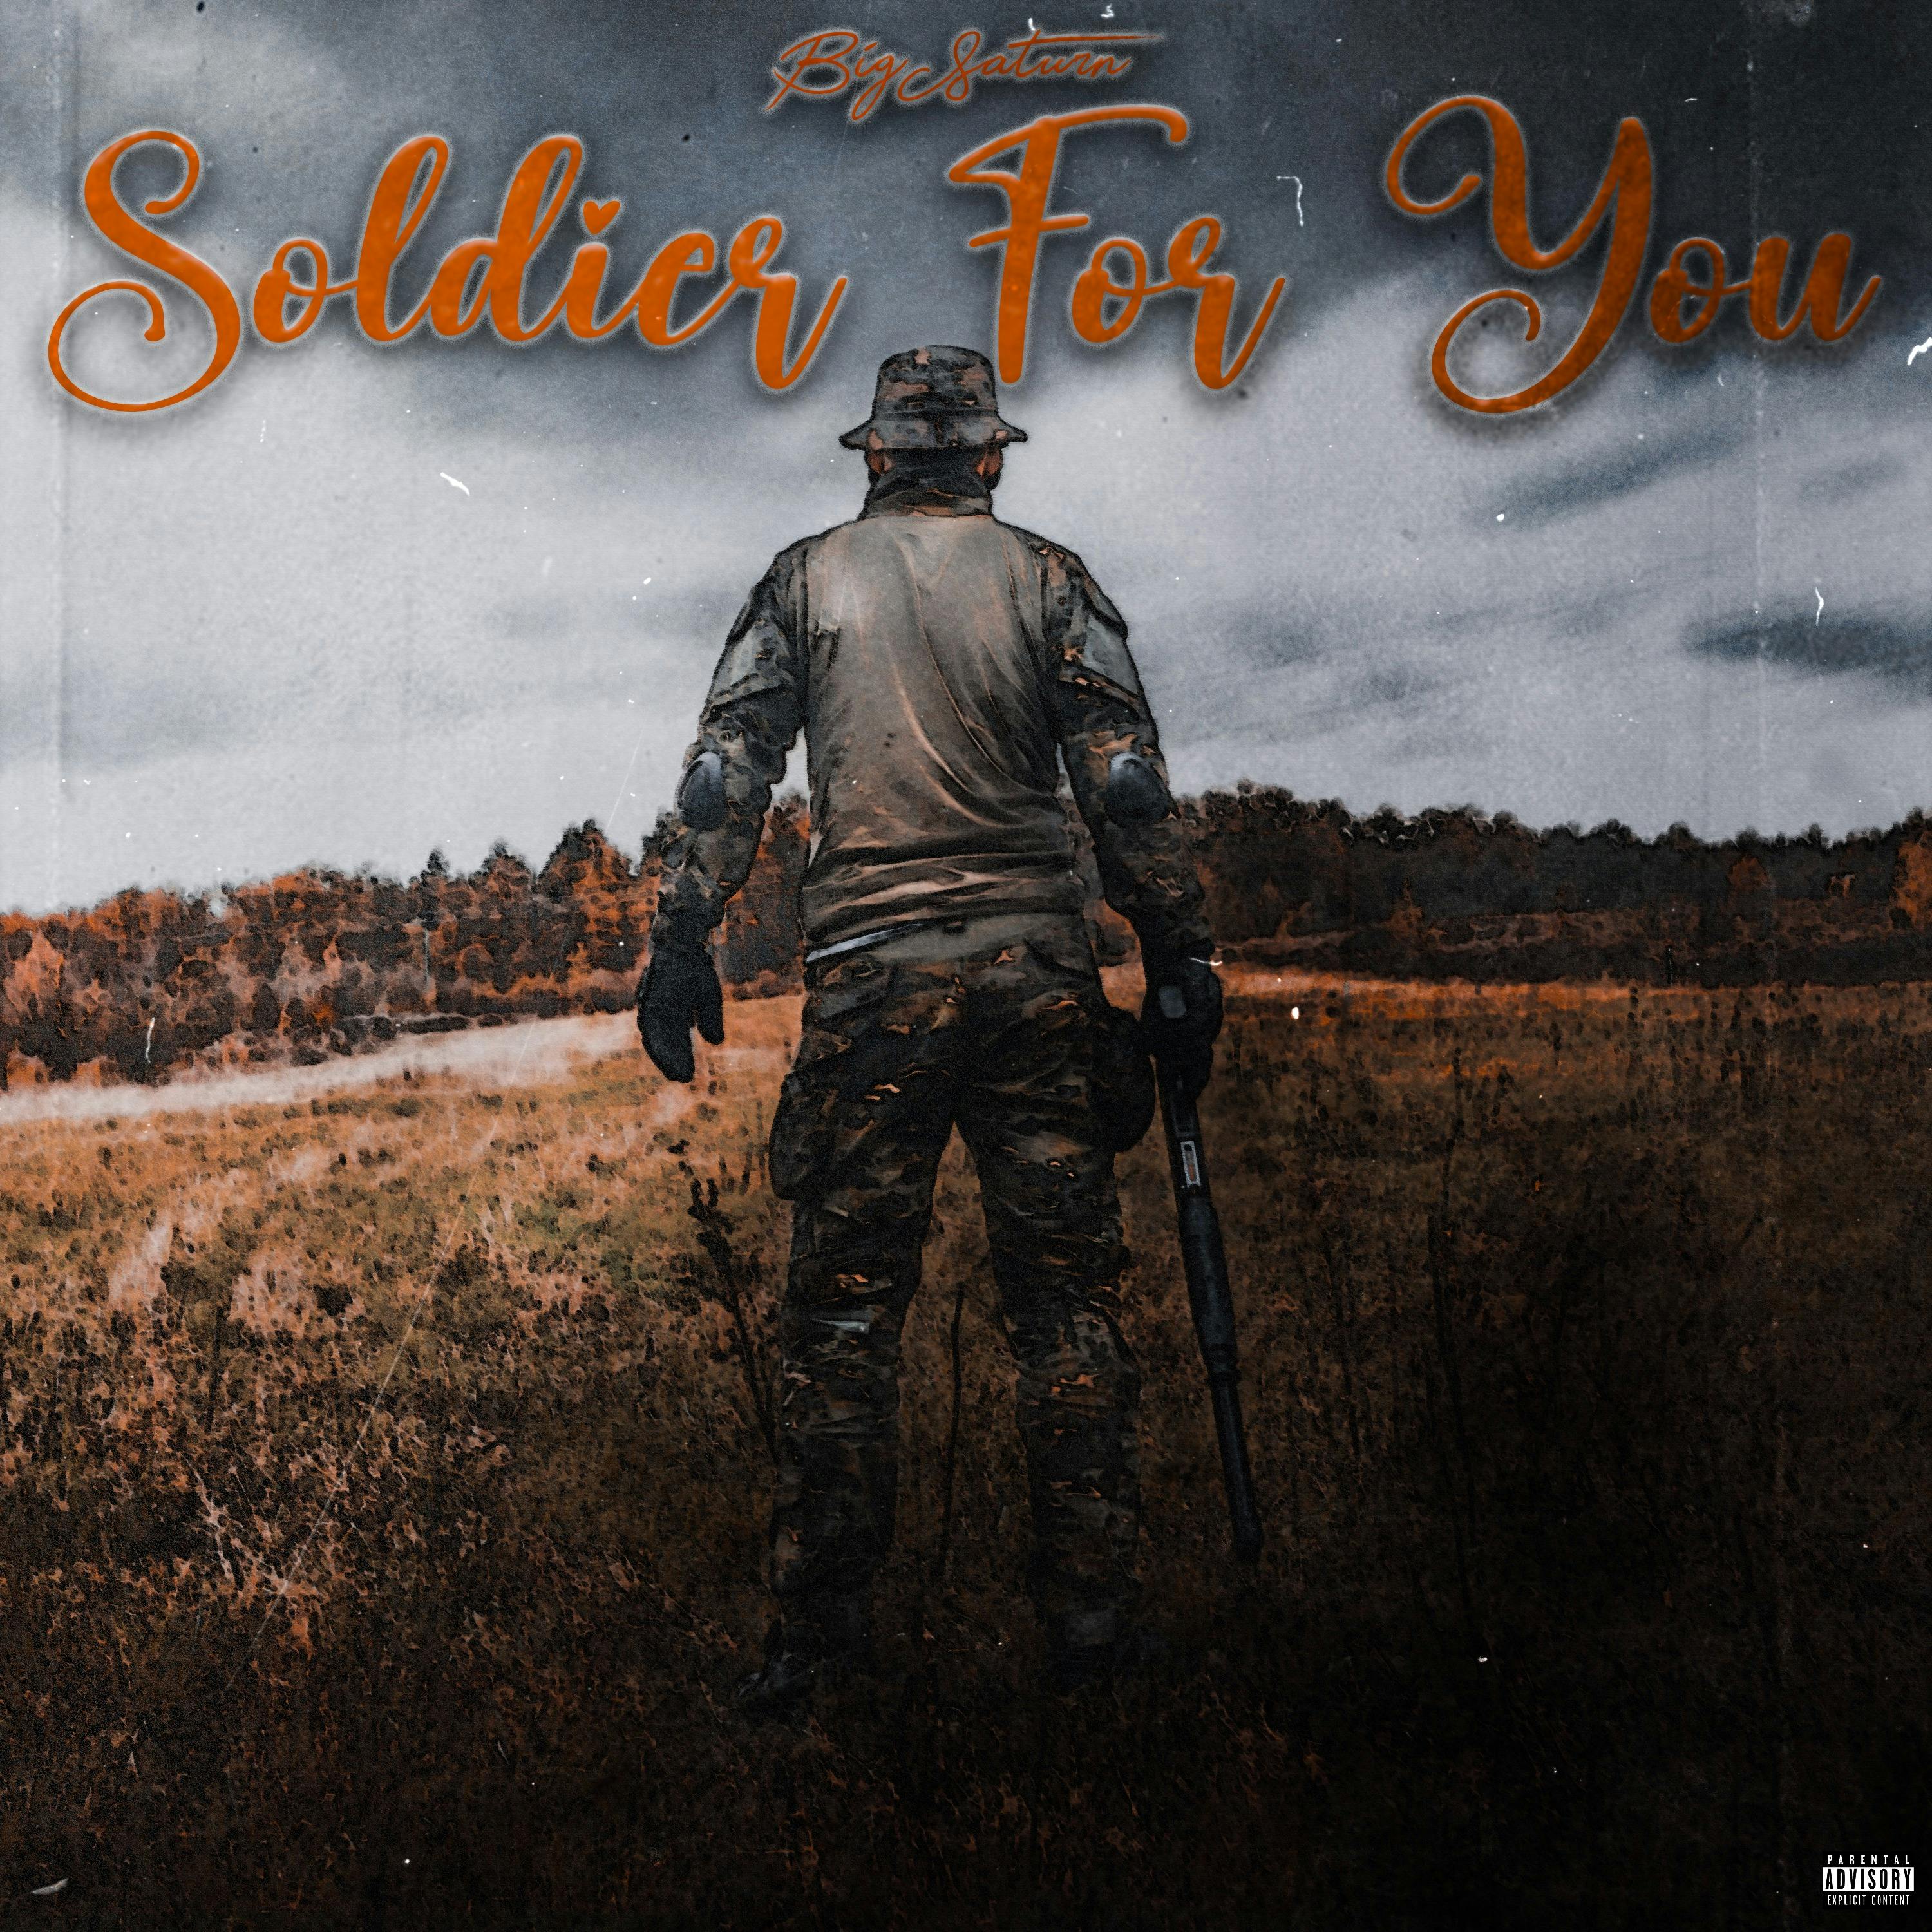 Soldier For You